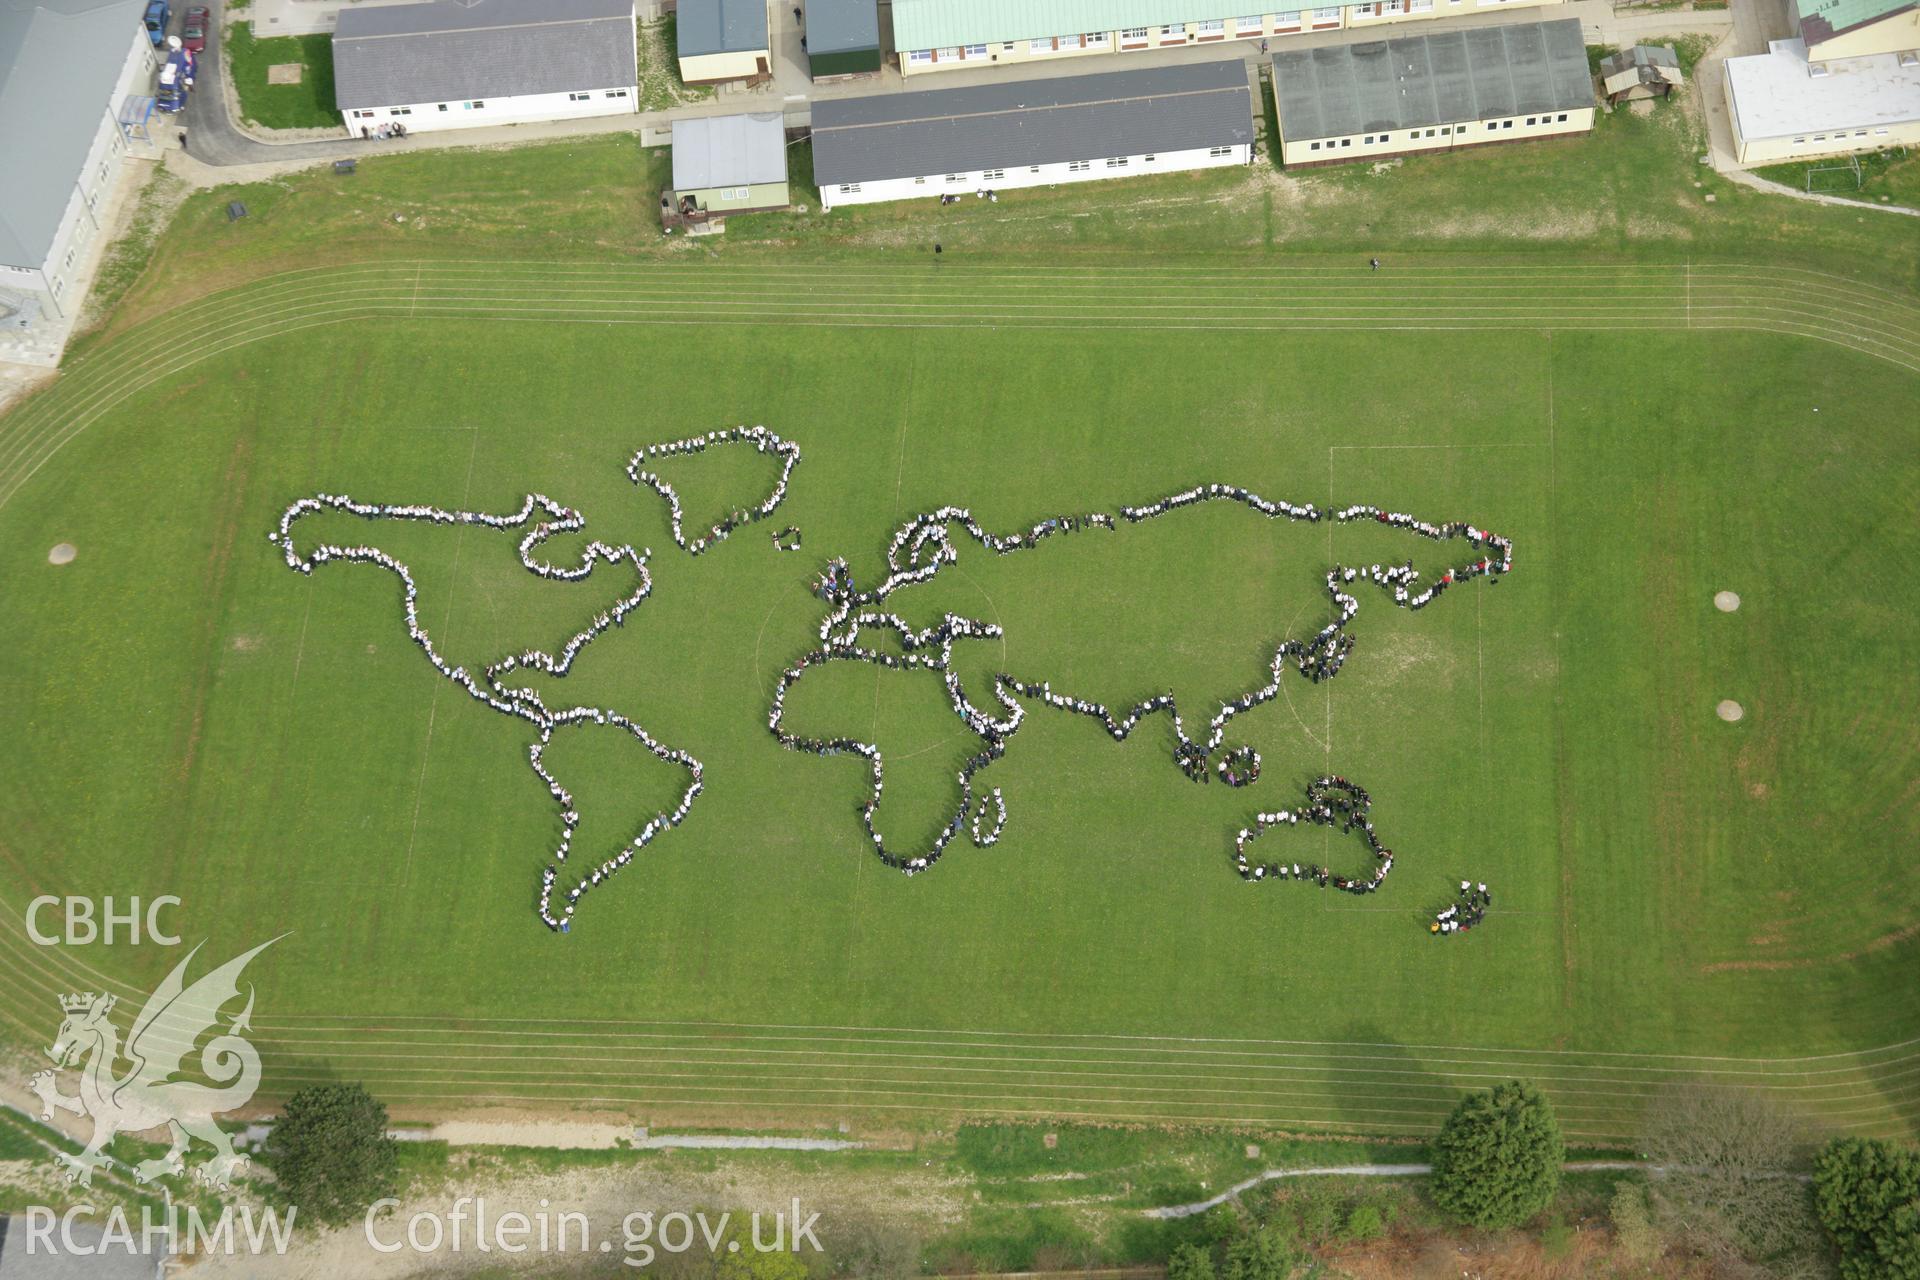 RCAHMW colour oblique aerial photograph of Penglais Comprehensive School, World Map of 1500 pupils. Taken on 17 April 2007 by Toby Driver